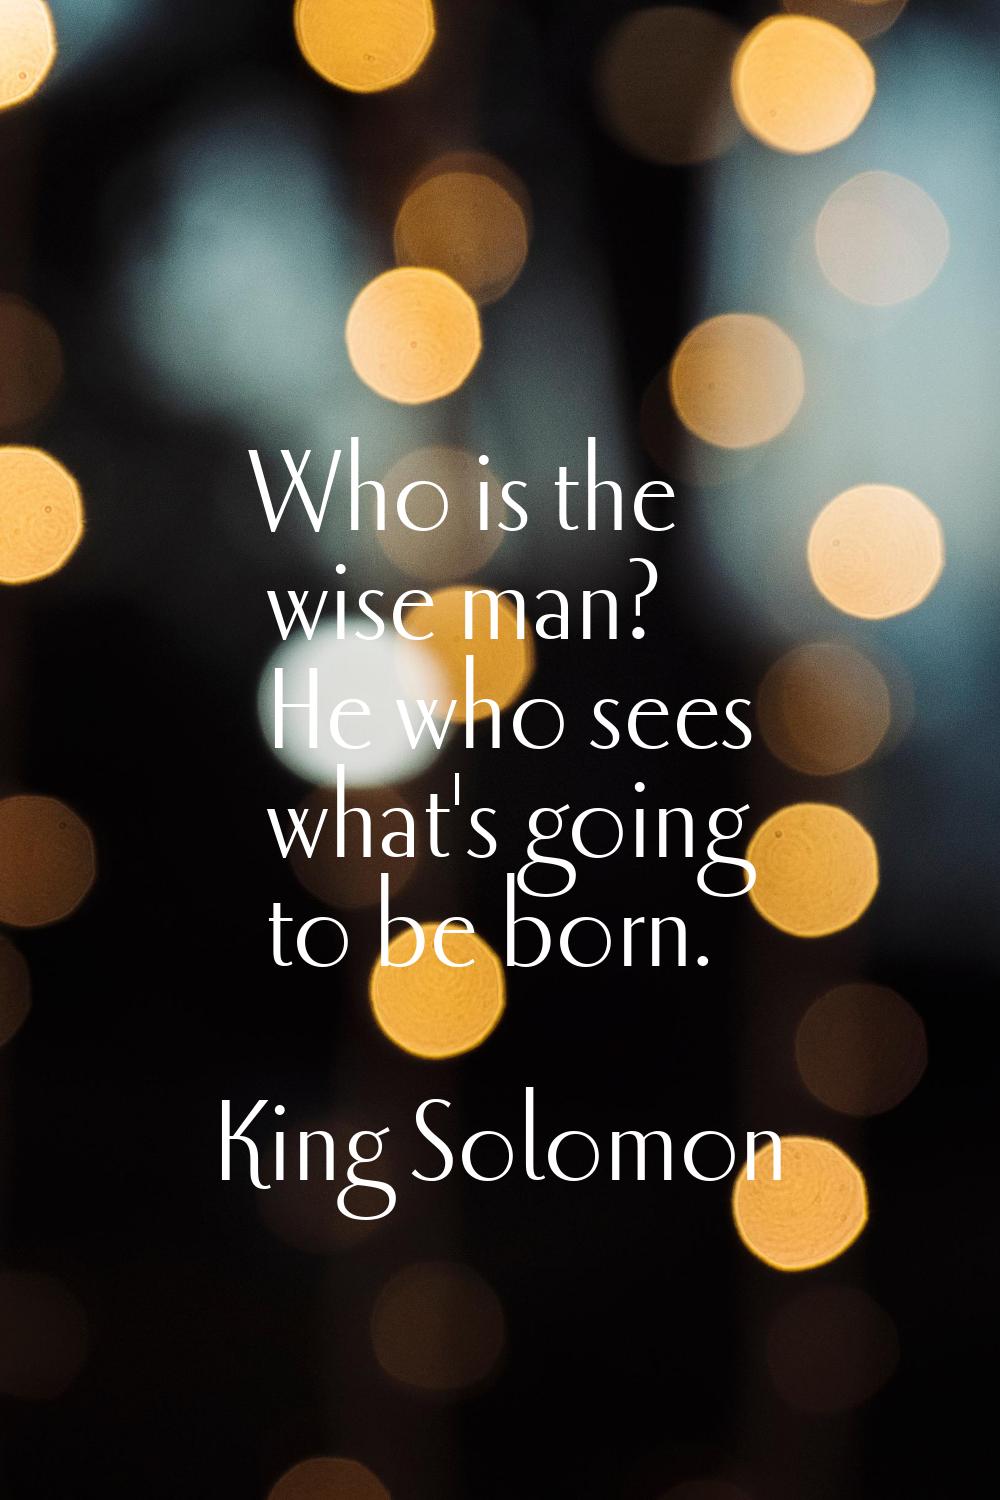 Who is the wise man? He who sees what's going to be born.